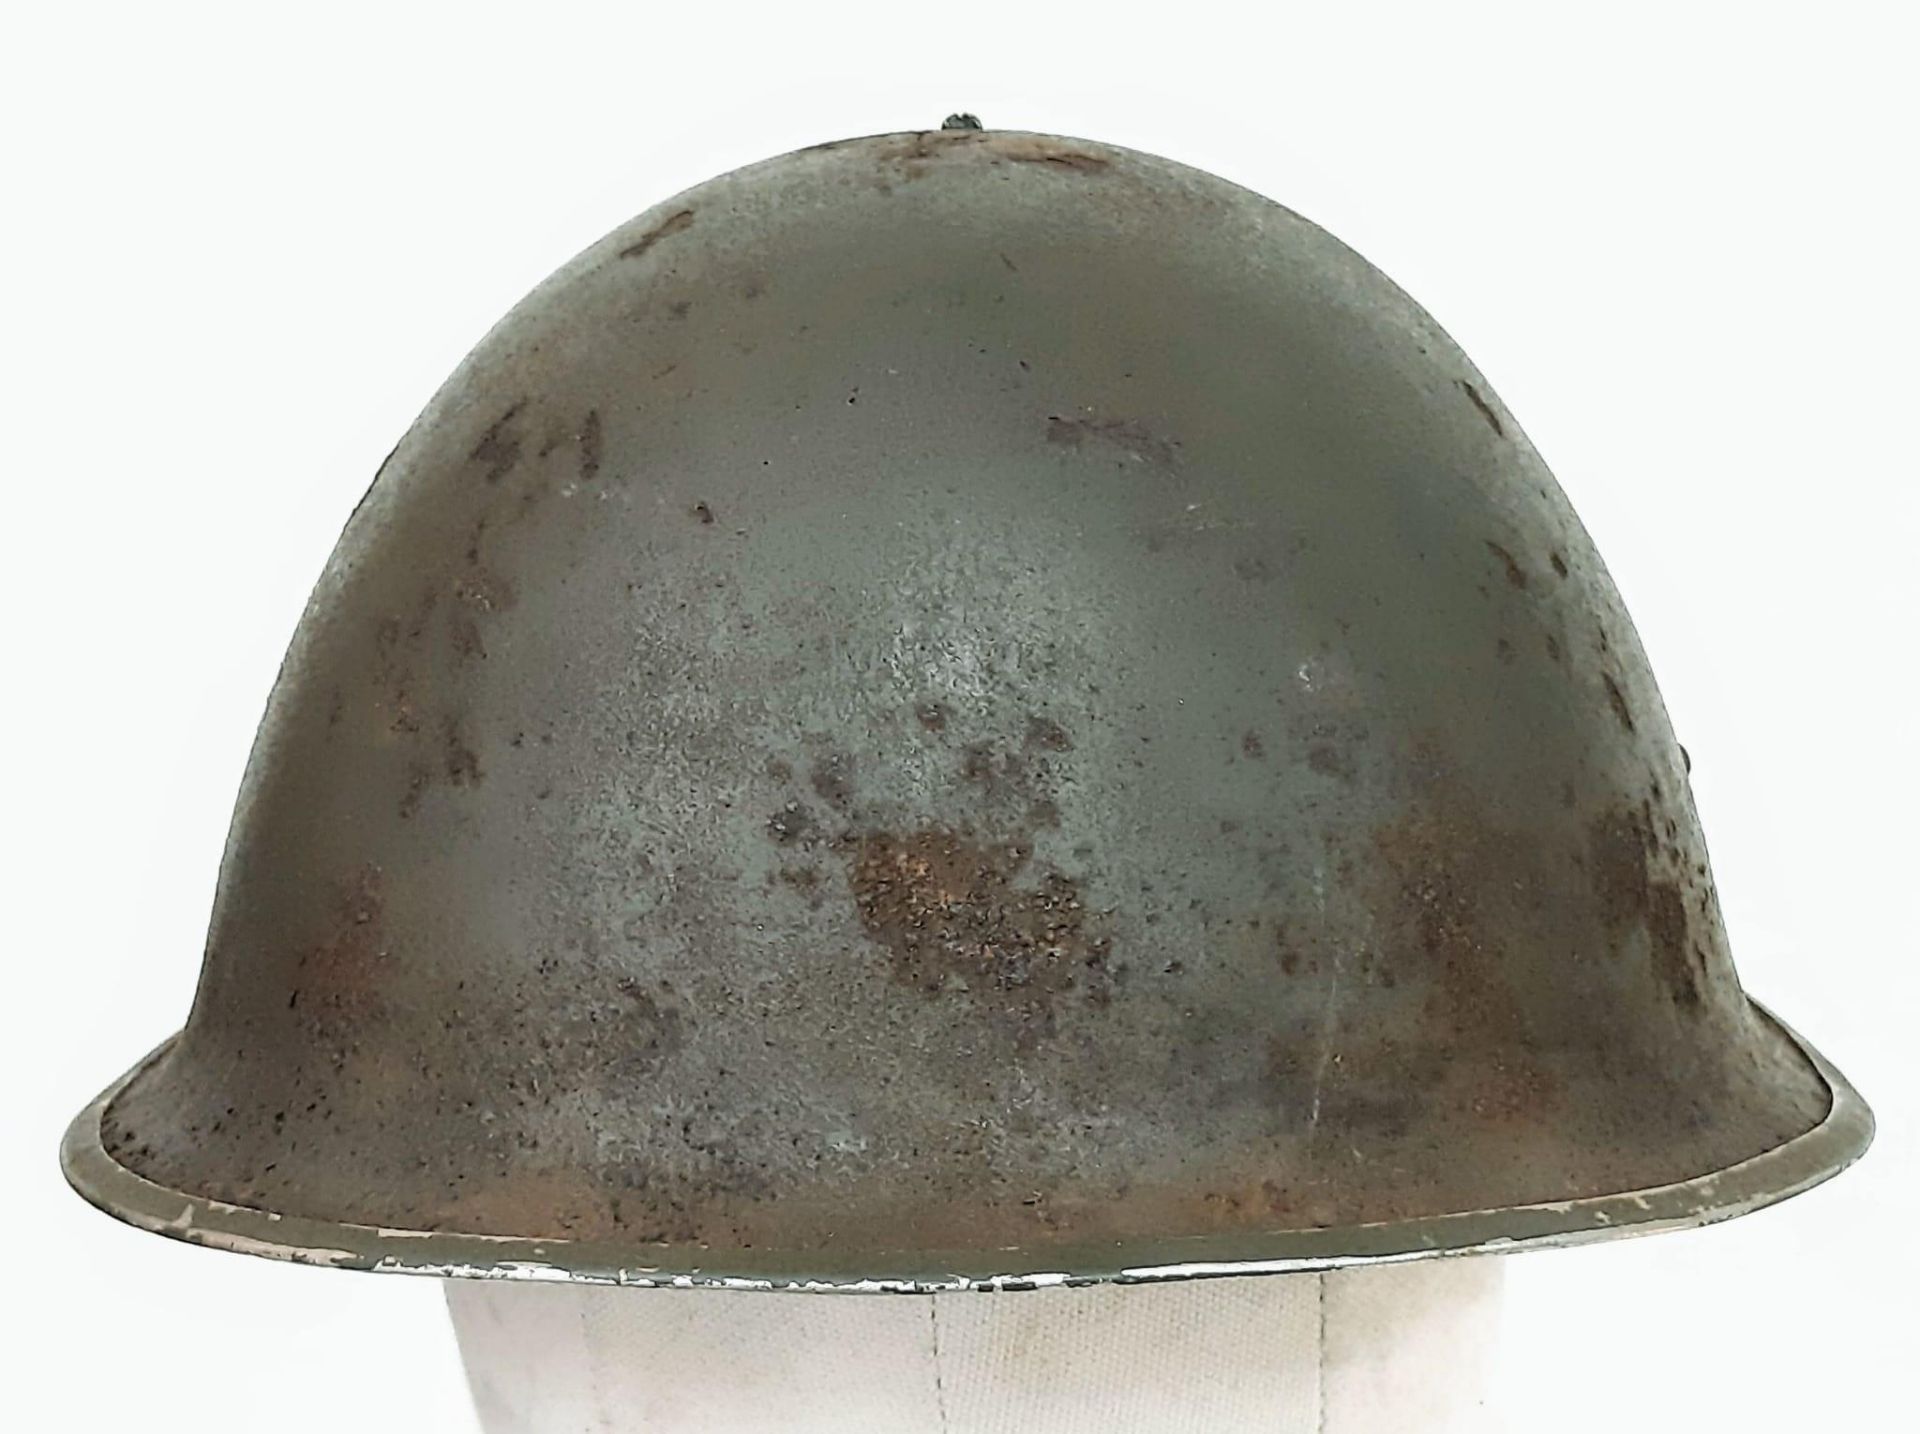 WW2 British 44 Pattern “Turtle” D-Day Helmet and liner, with insignia of the Royal Artillery. - Image 2 of 5